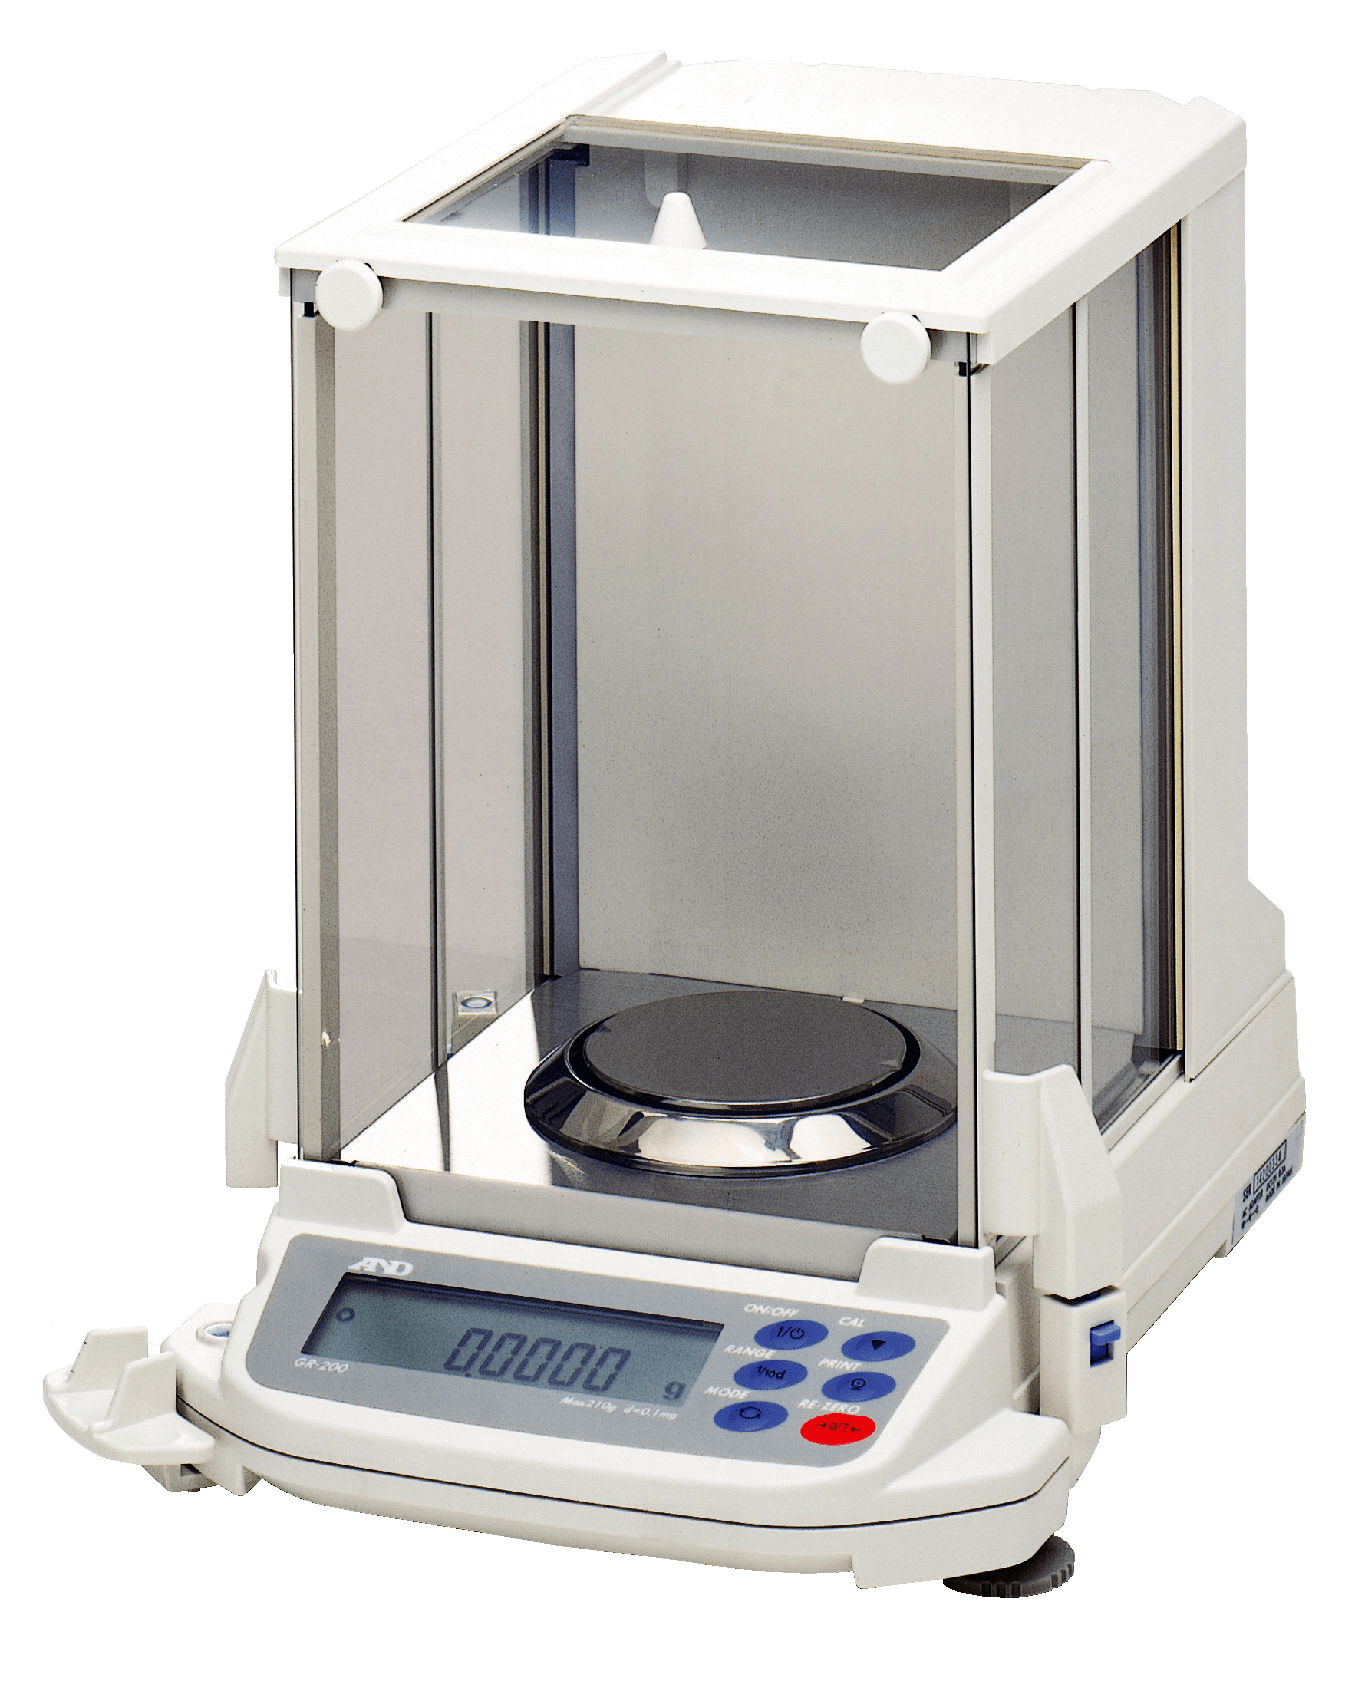 A And D GR-200 analytical balance with digital display and six raised multipurpose buttons